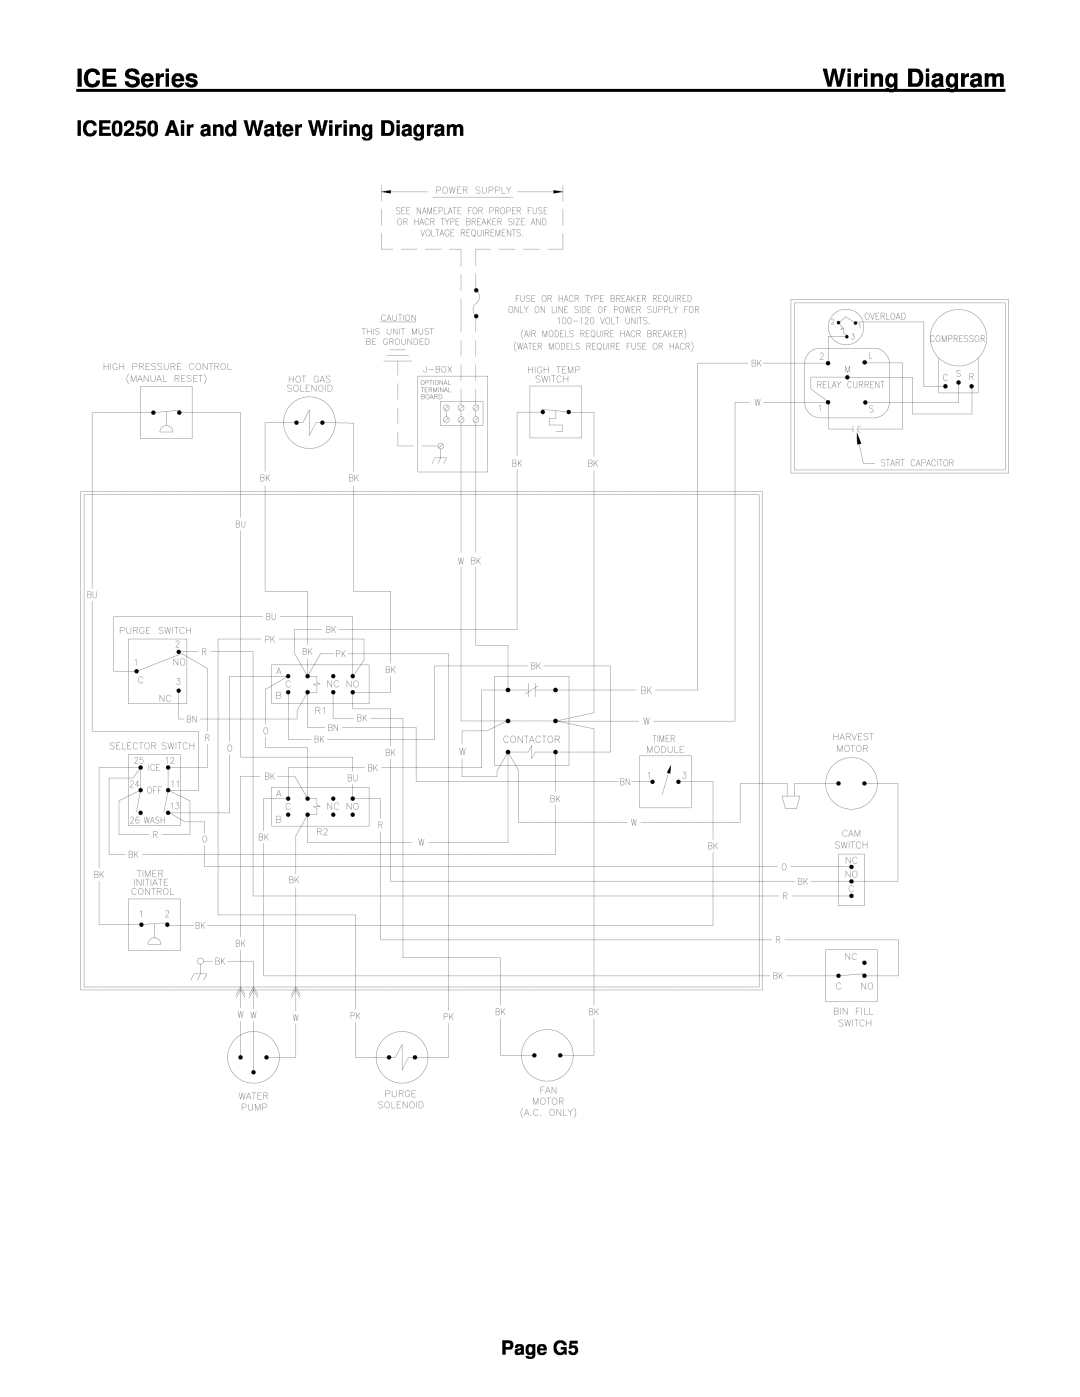 Ice-O-Matic ICE0250 Series installation manual ICE0250 Air and Water Wiring Diagram, ICE Series, Page G5 